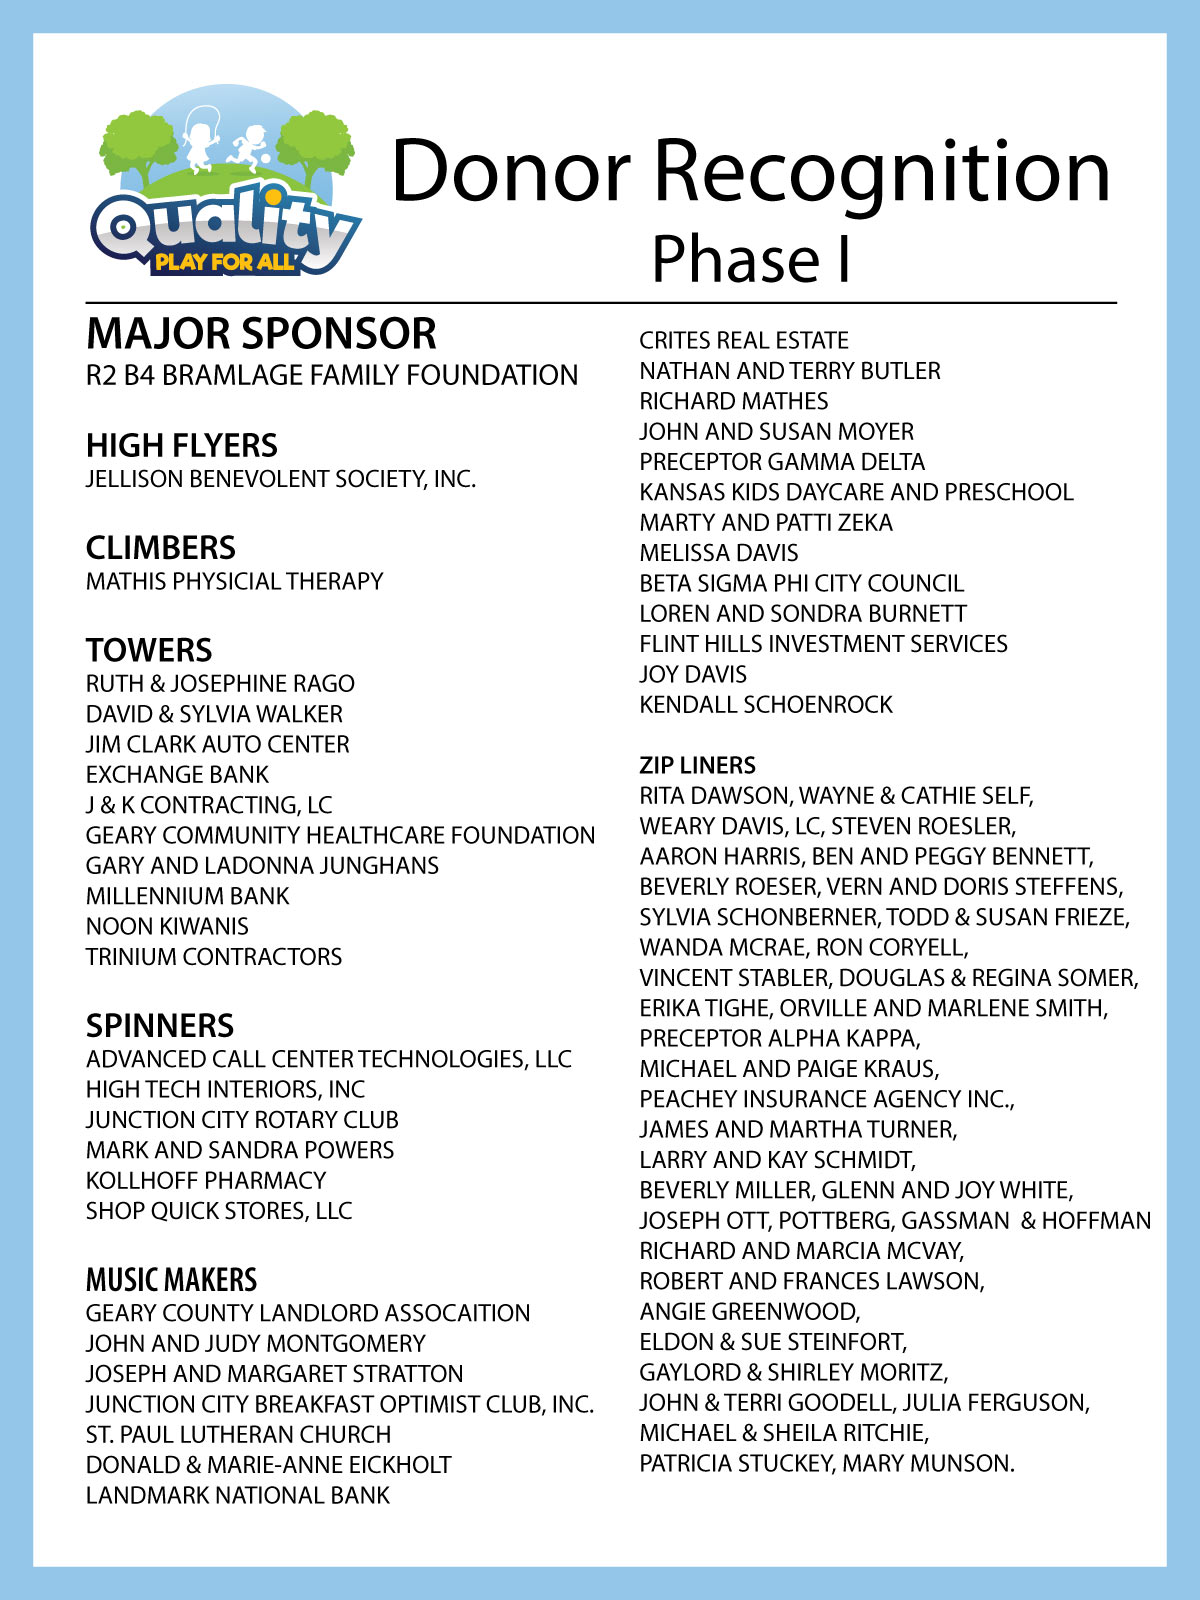 Thank You Phase 1 Donors!